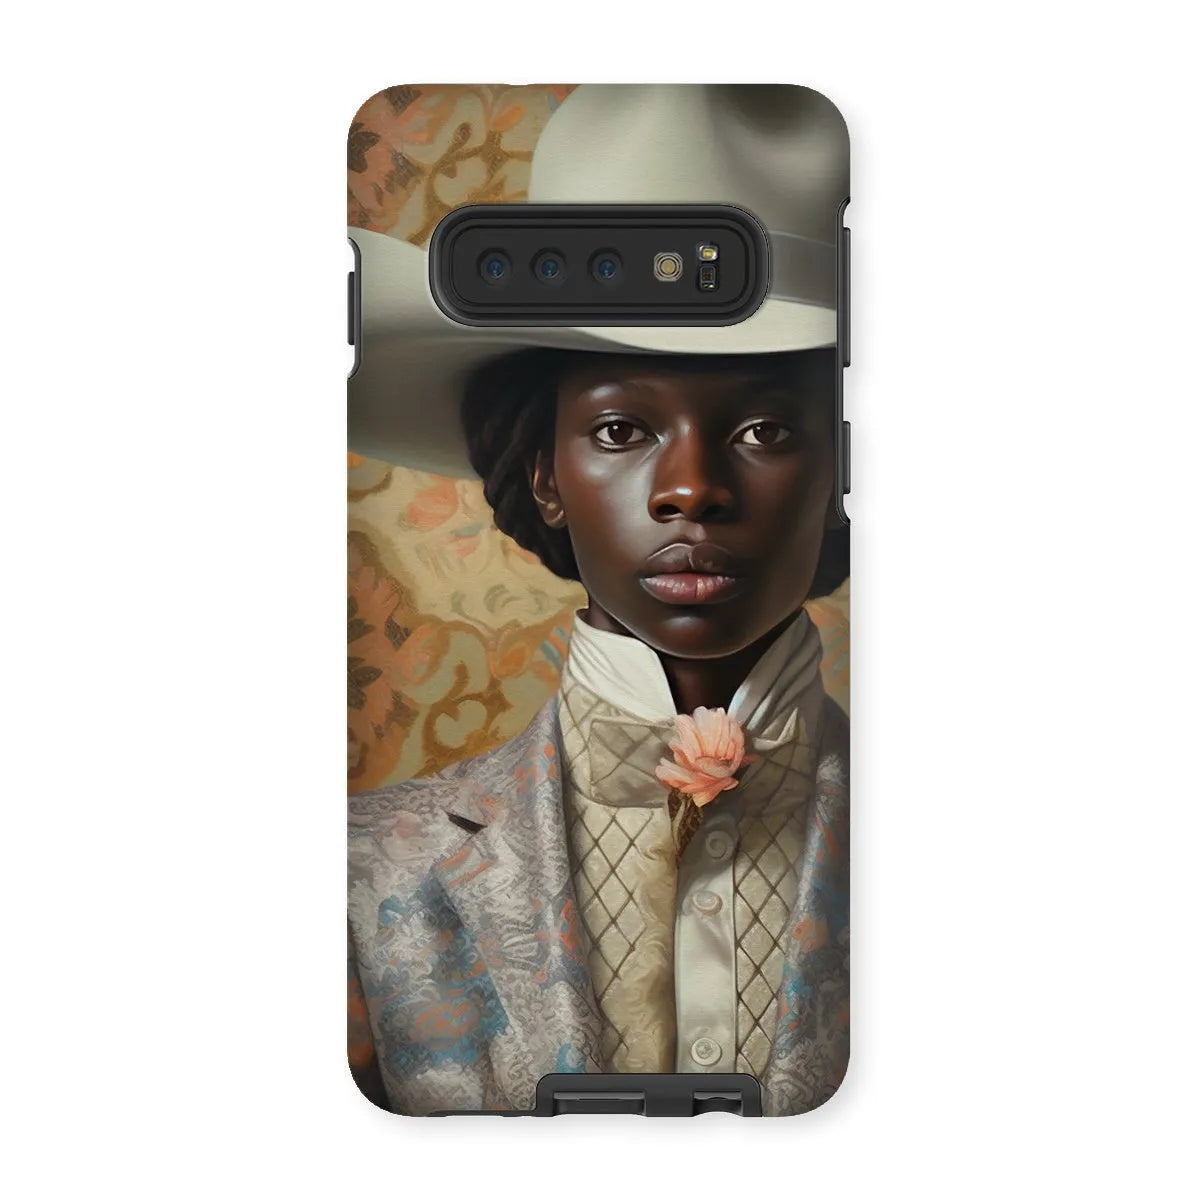 Caesar The Gay Cowboy - Gay Aesthetic Art Phone Case - Samsung Galaxy S10 / Matte - Mobile Phone Cases - Aesthetic Art